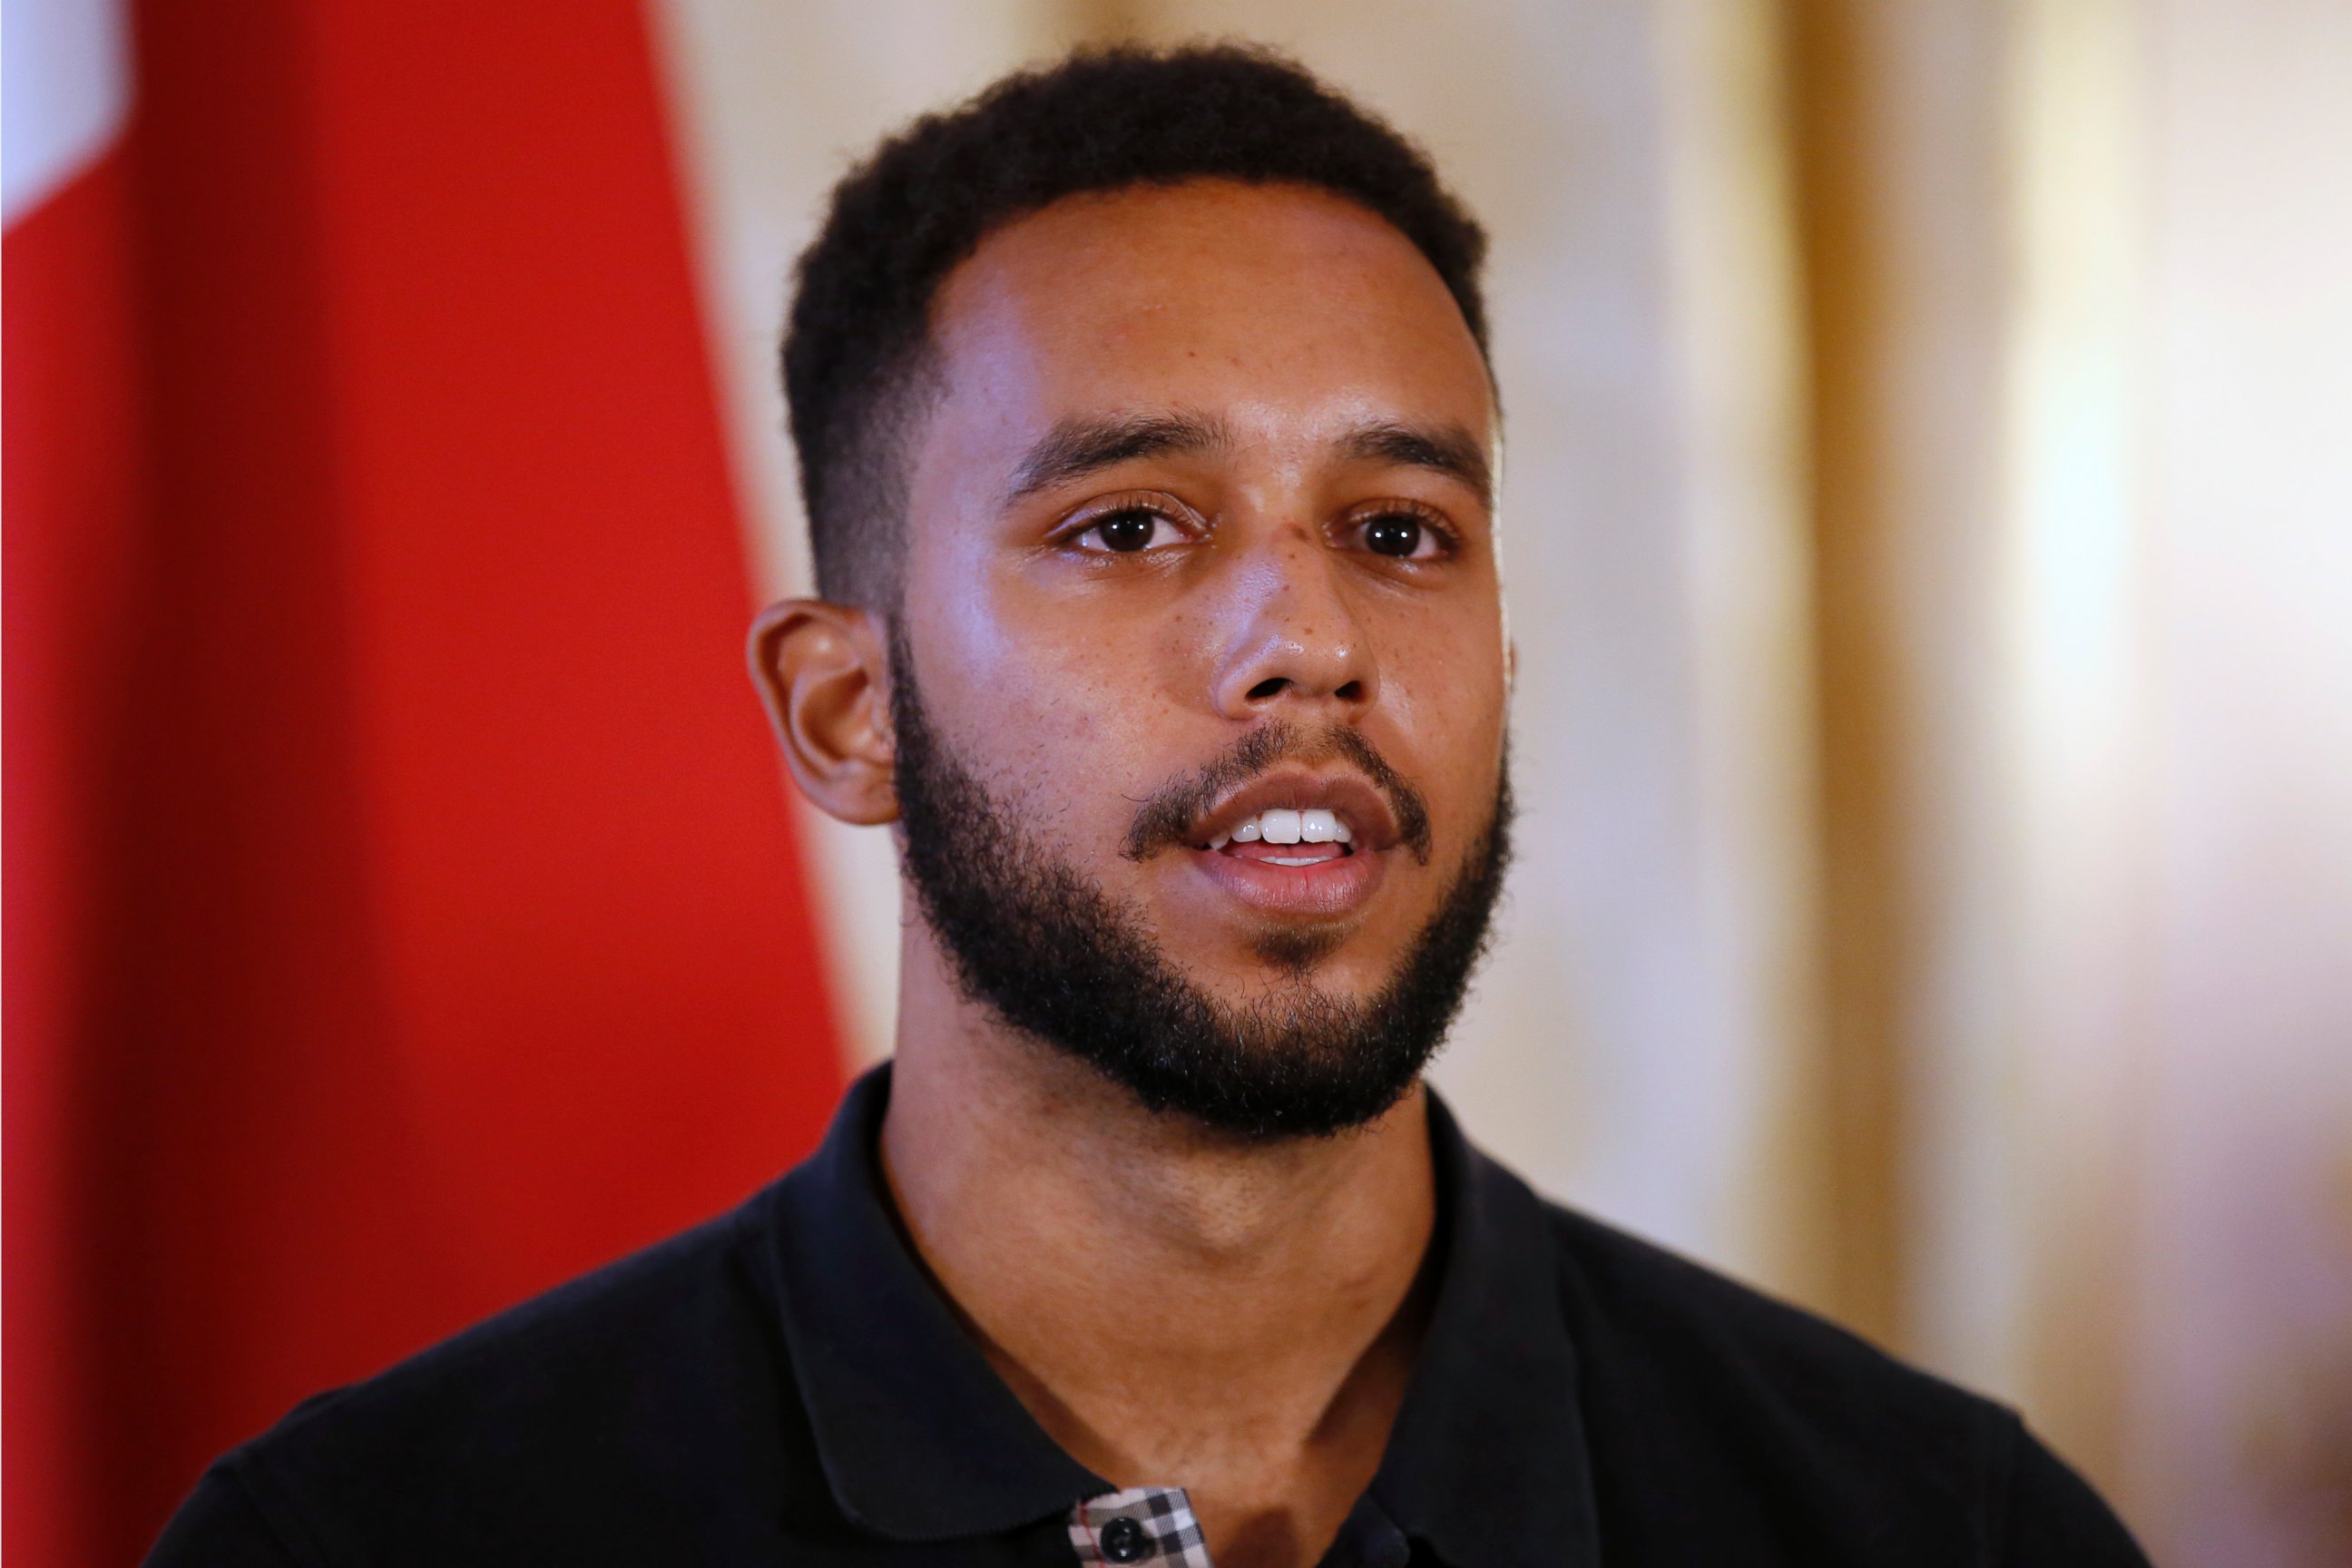 PHOTO: Anthony Sadler, a senior at Sacramento University in California, attends a press conference held at the U.S. Ambassador's residence in Paris, France, Aug. 23, 2015.